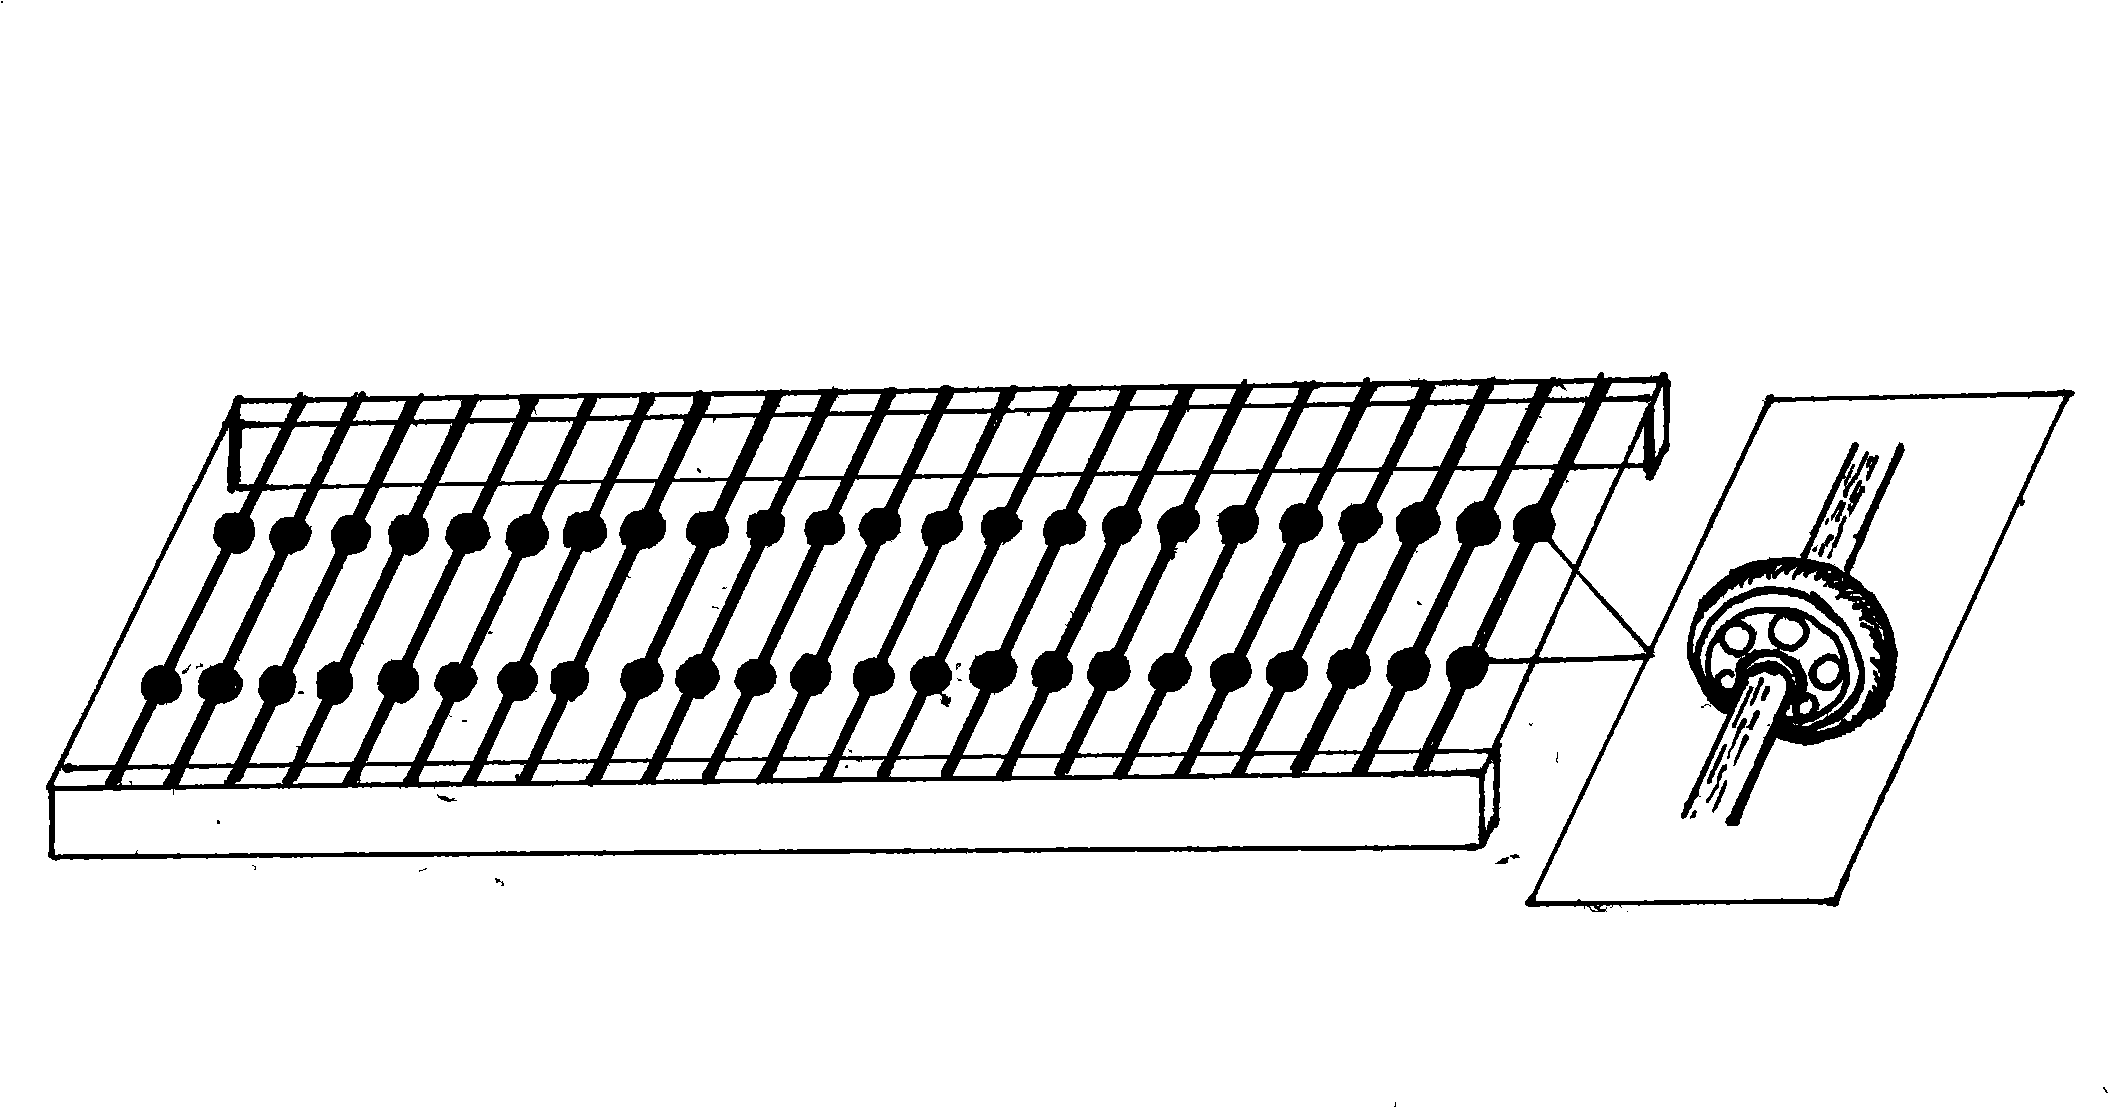 Generating apparatus for electric power